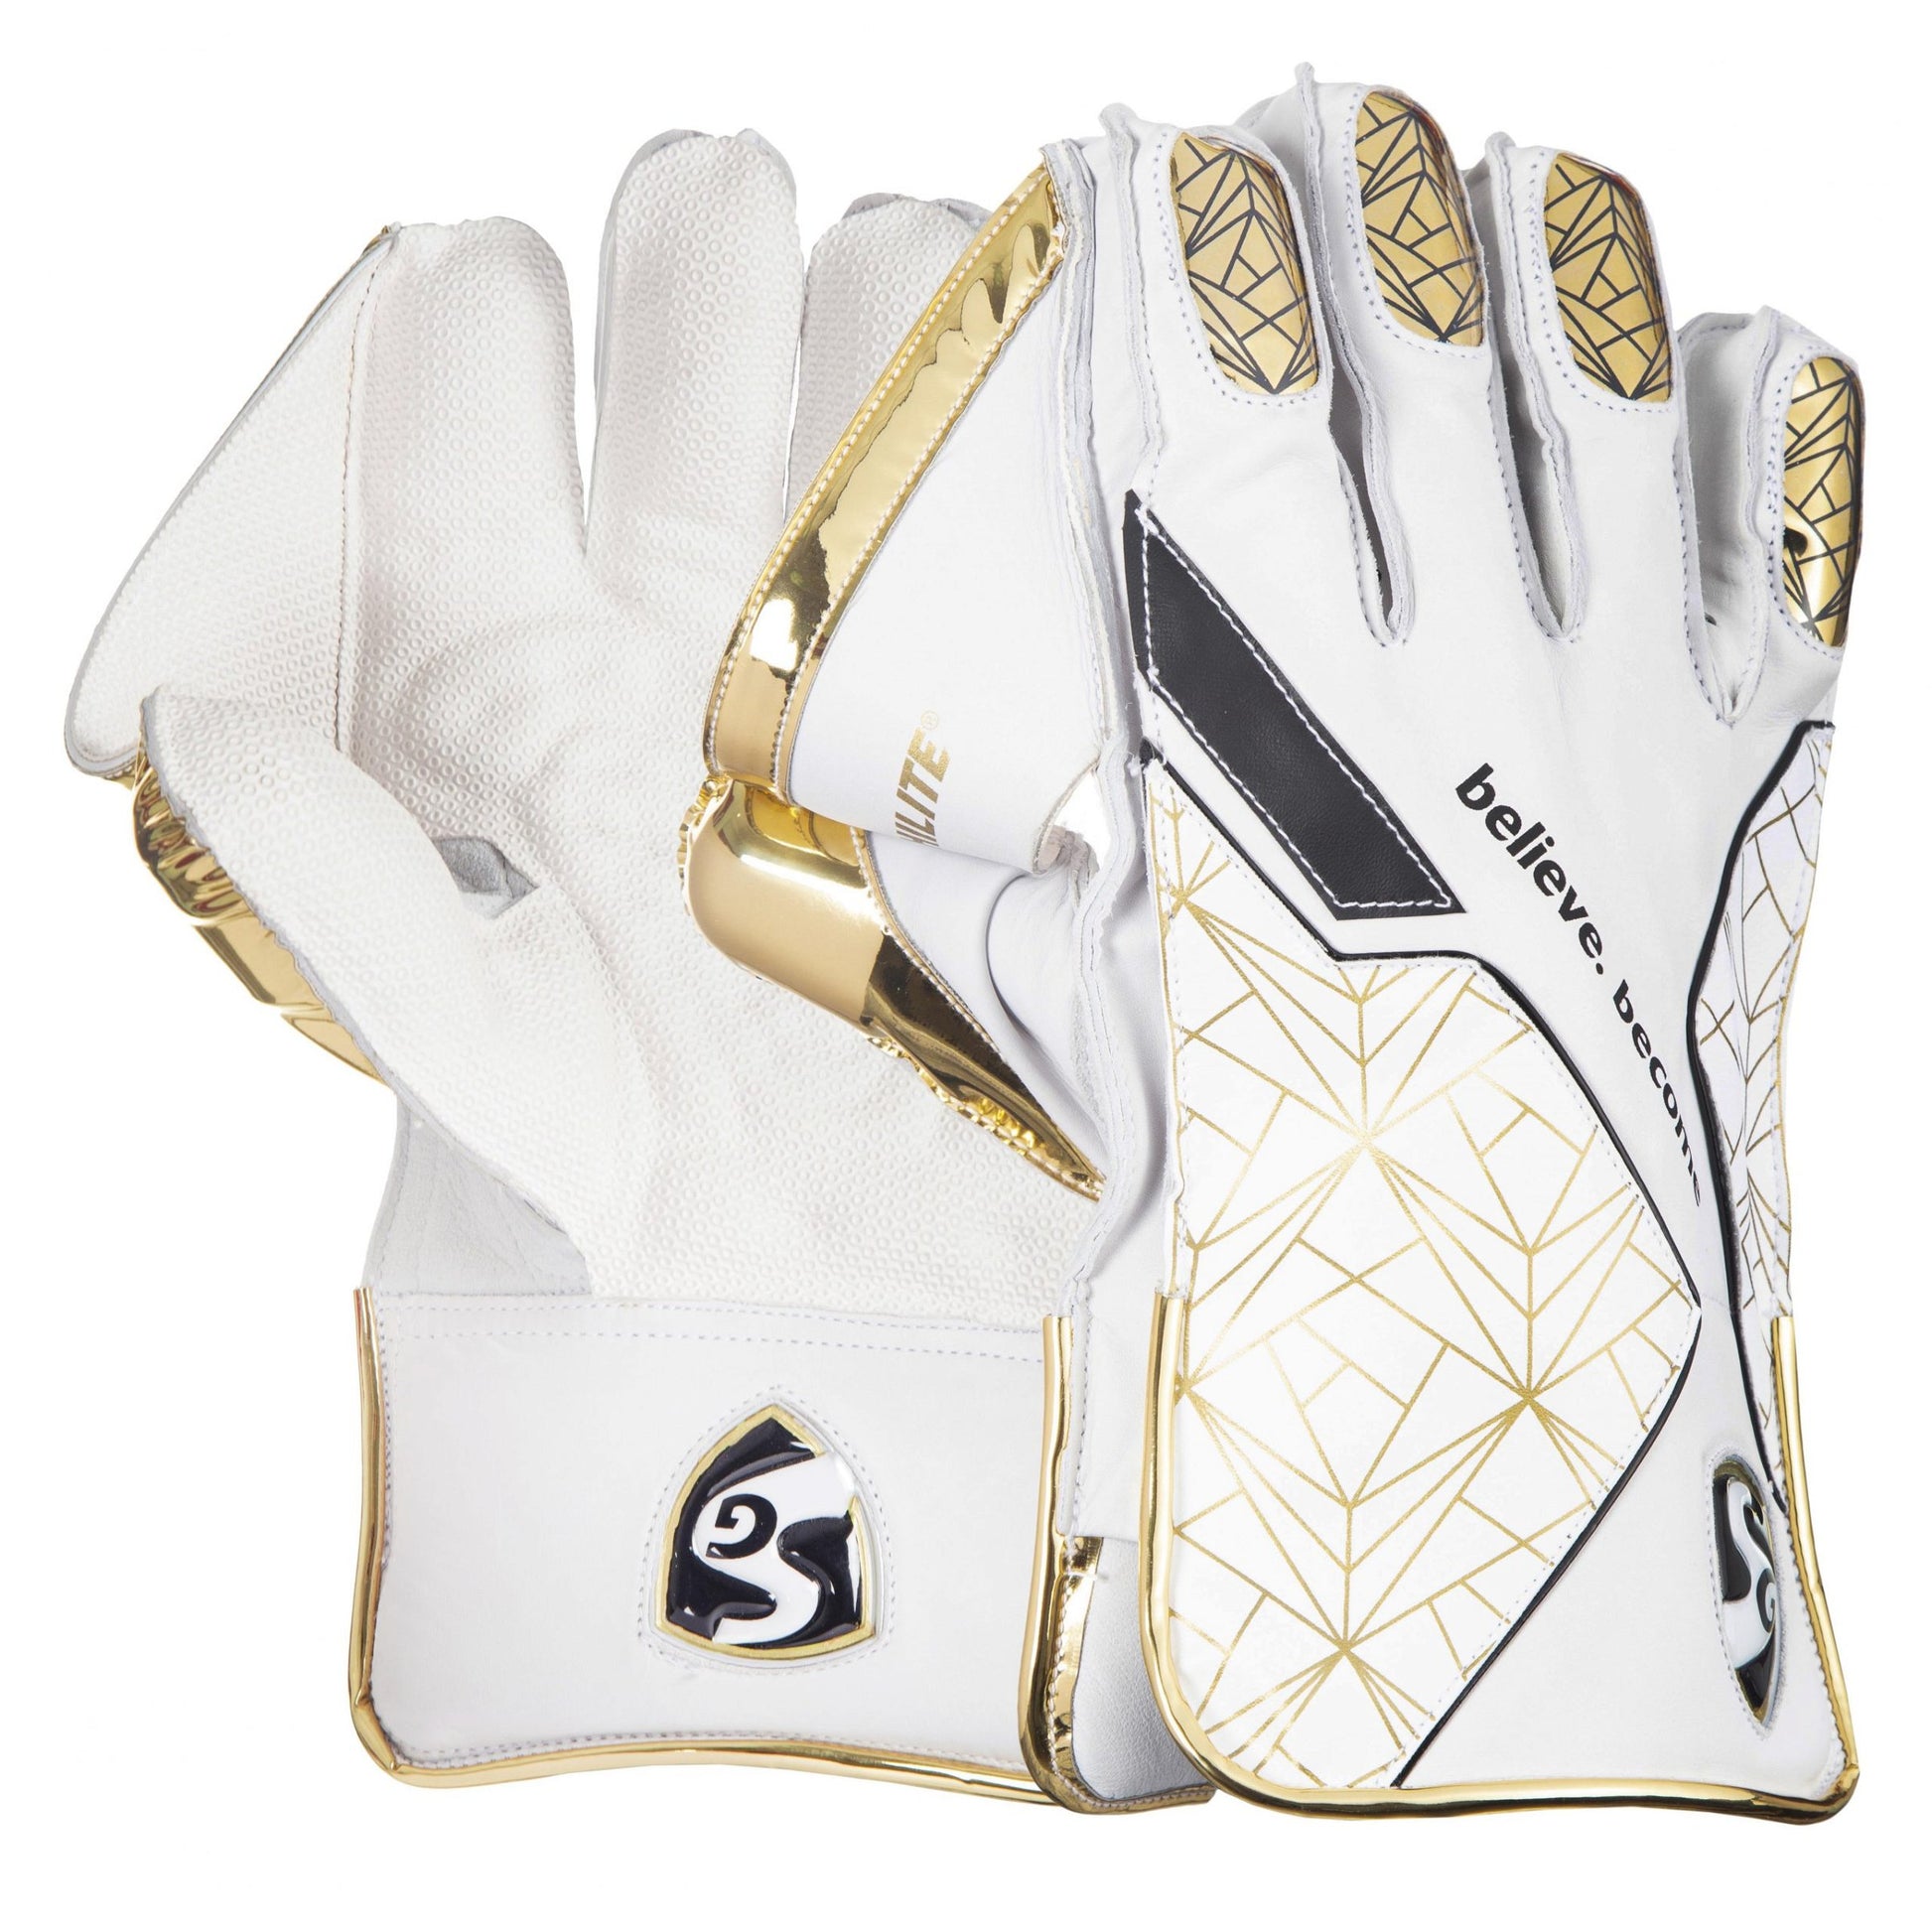 SG Hilite Wicket Keeping Gloves (Multi-Color) W.K. Gloves